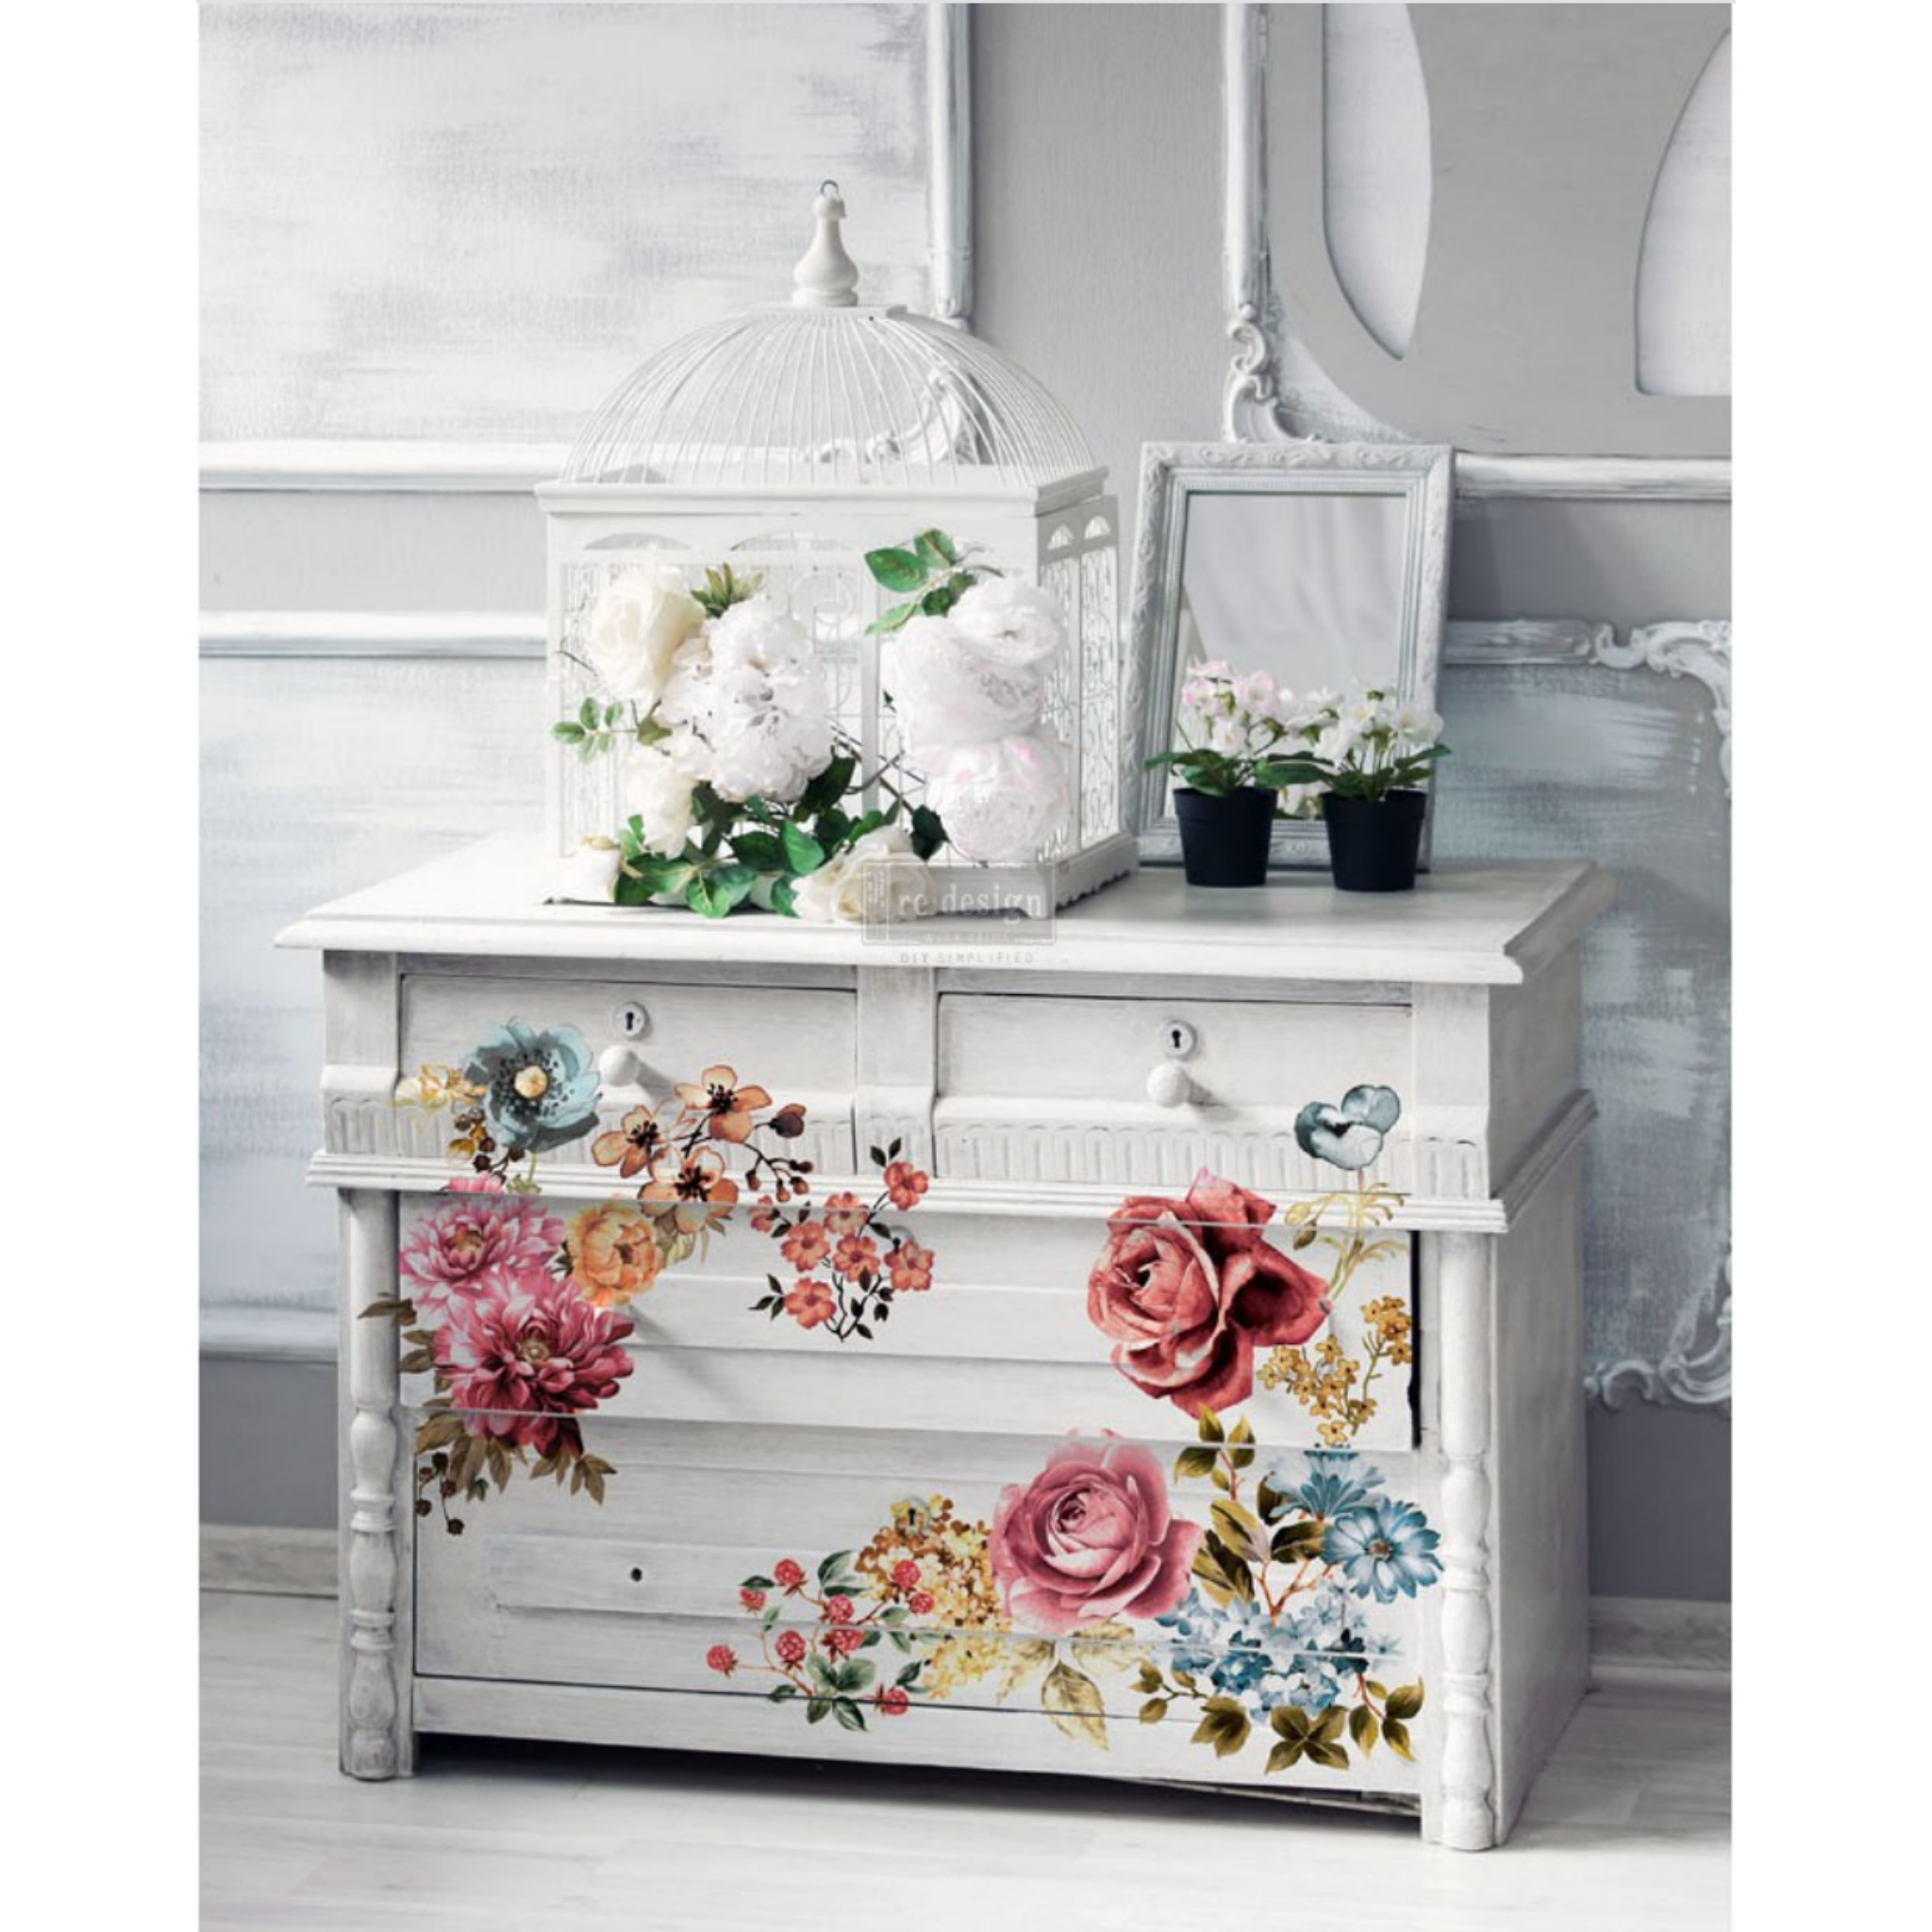 A small white dresser features ReDesign with Prima's Ruby Rose transfer on it.